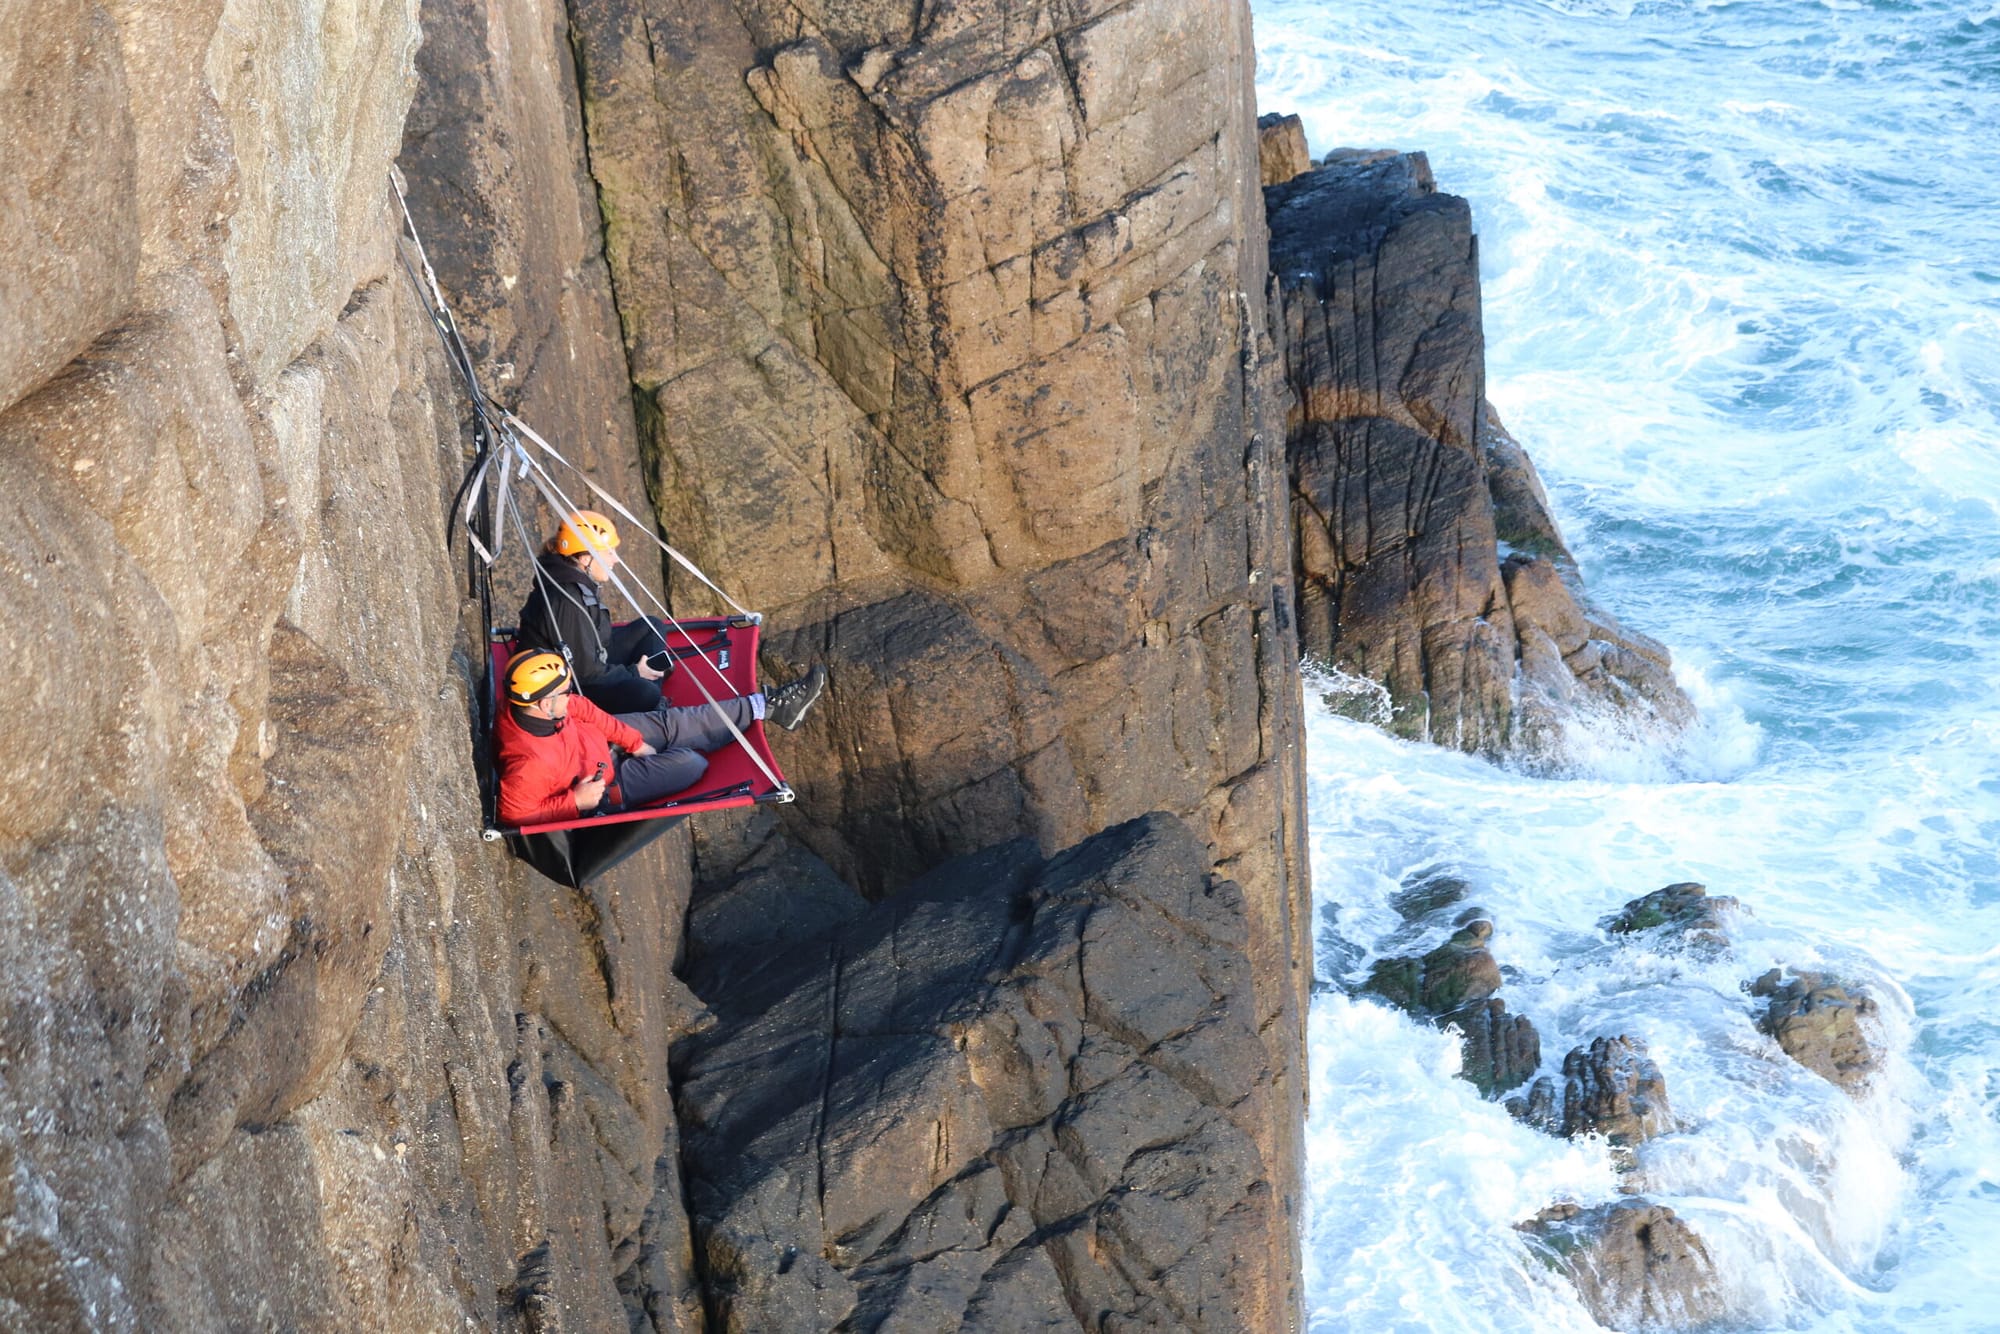 2 men resting on the side of a cliff in Wales